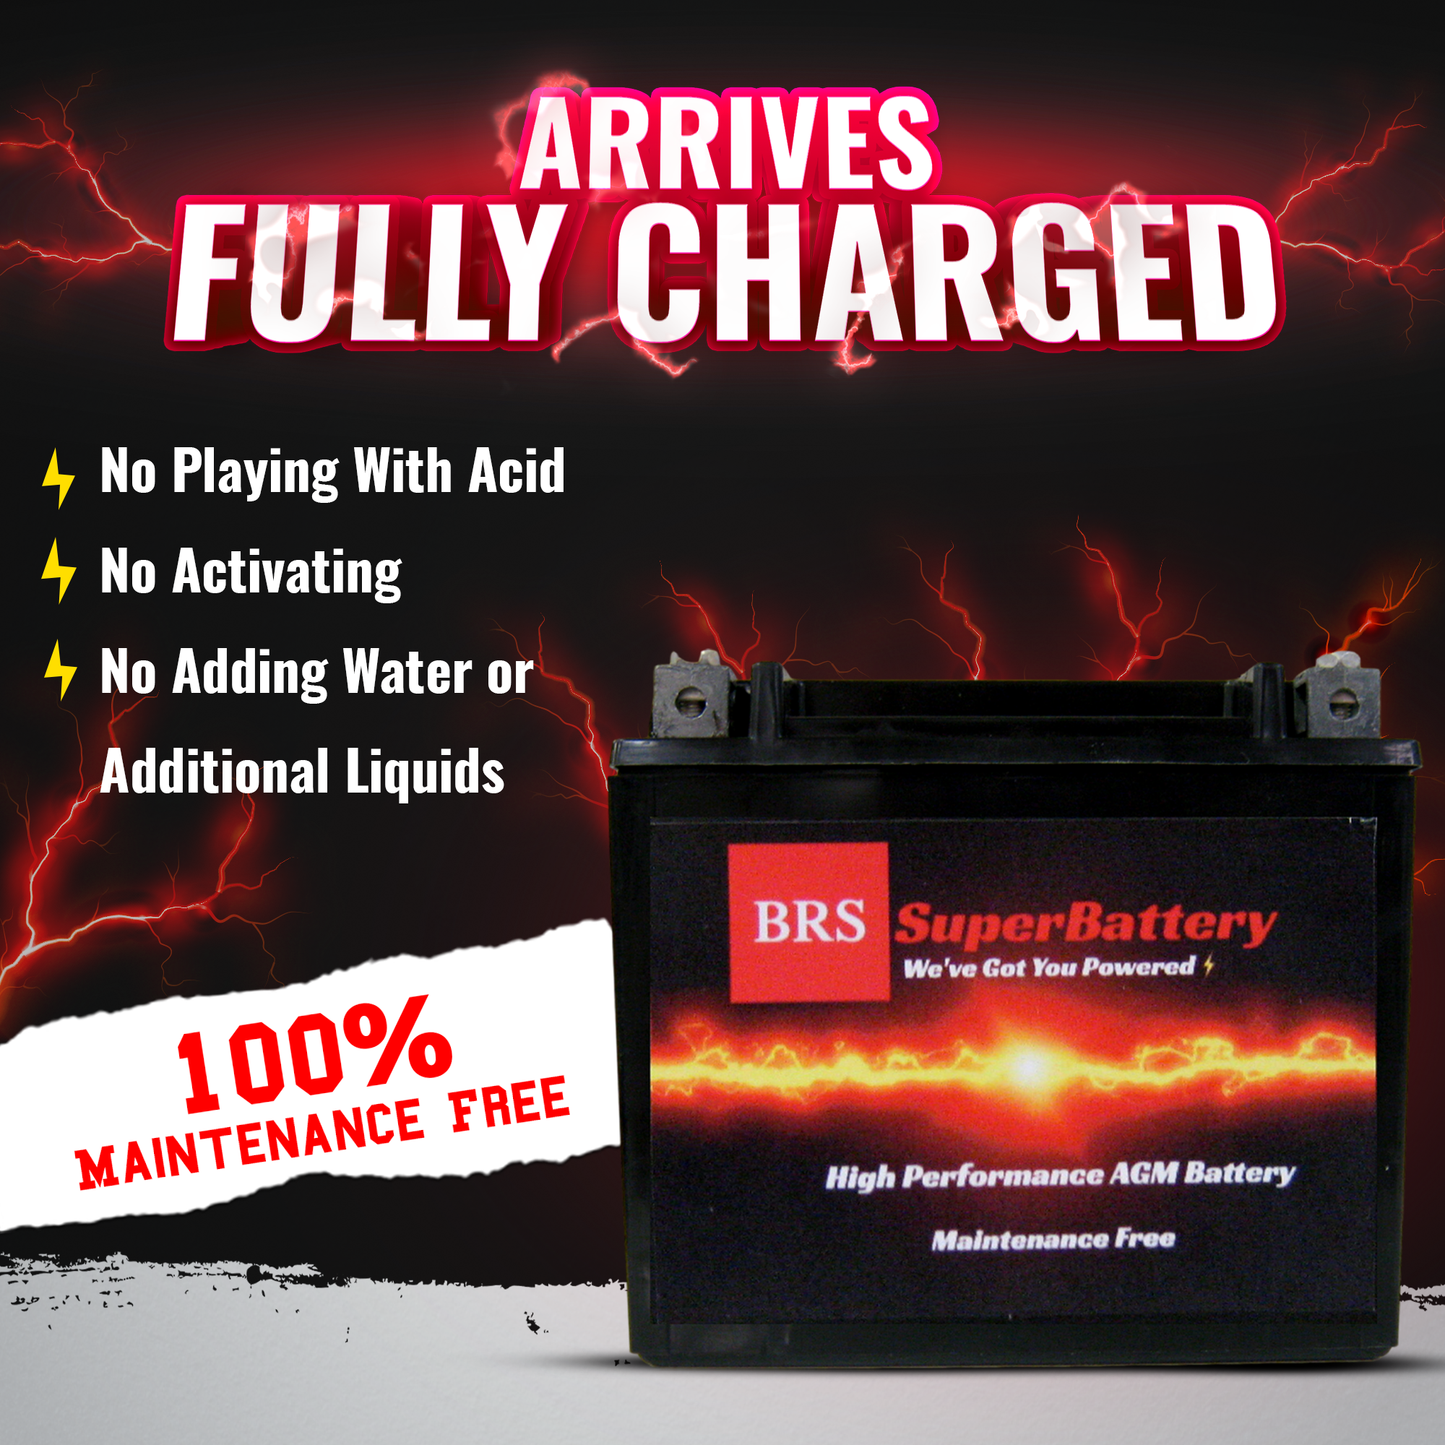 BRS14AHL-BS 12v High Performance Sealed AGM PowerSport 10 Year Battery - BRS Super Battery